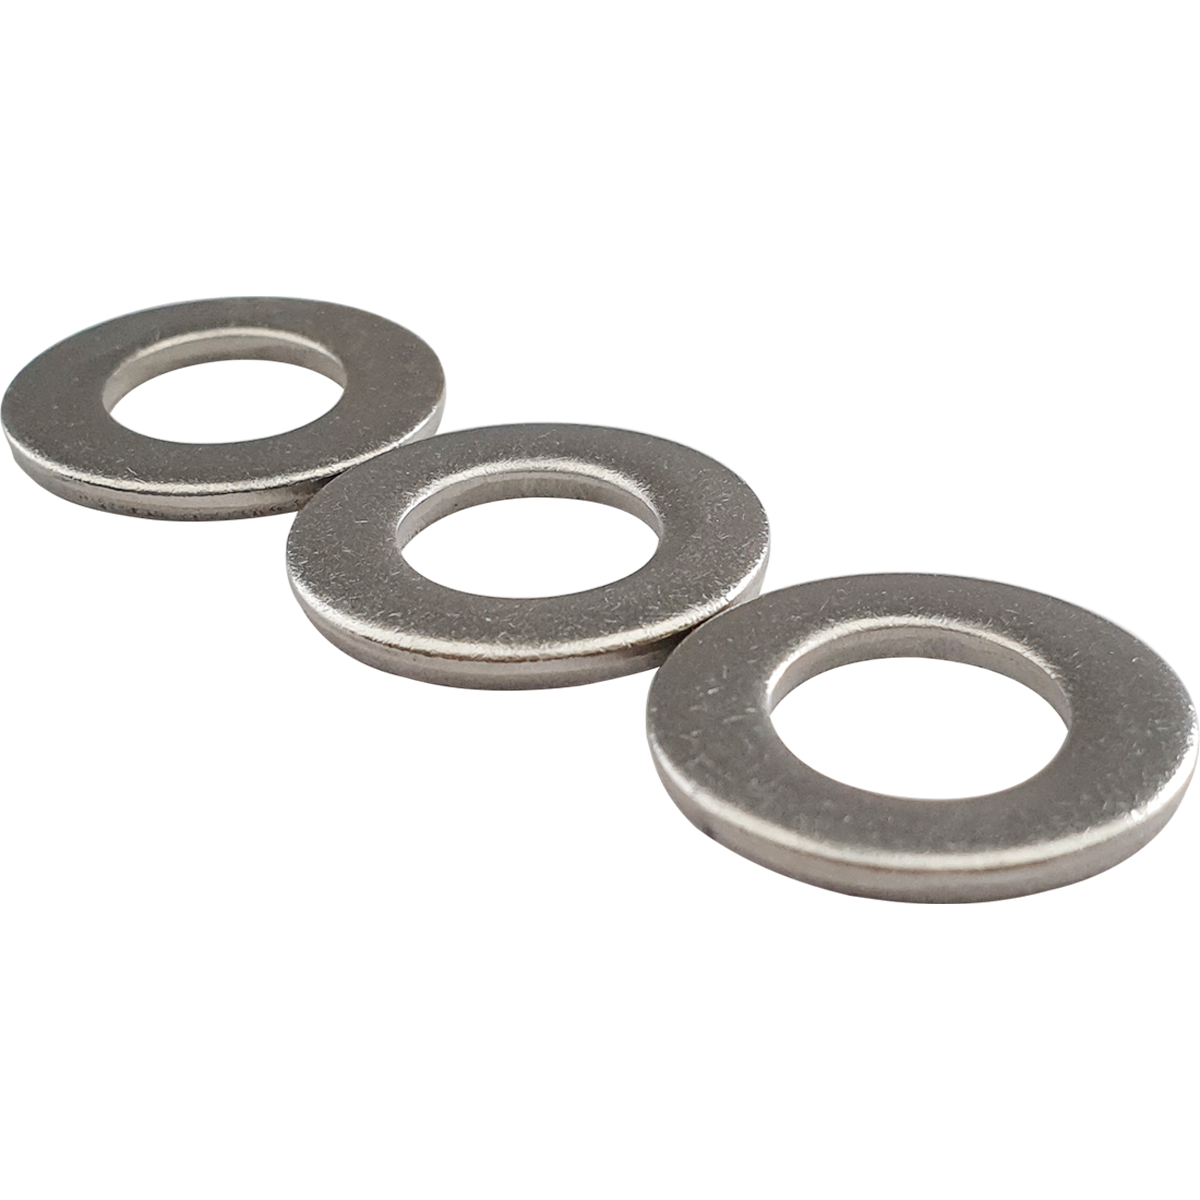 Metric, corrosion resistant, A2 stainless steel ‘Form A’ flat washers in a range of sizes